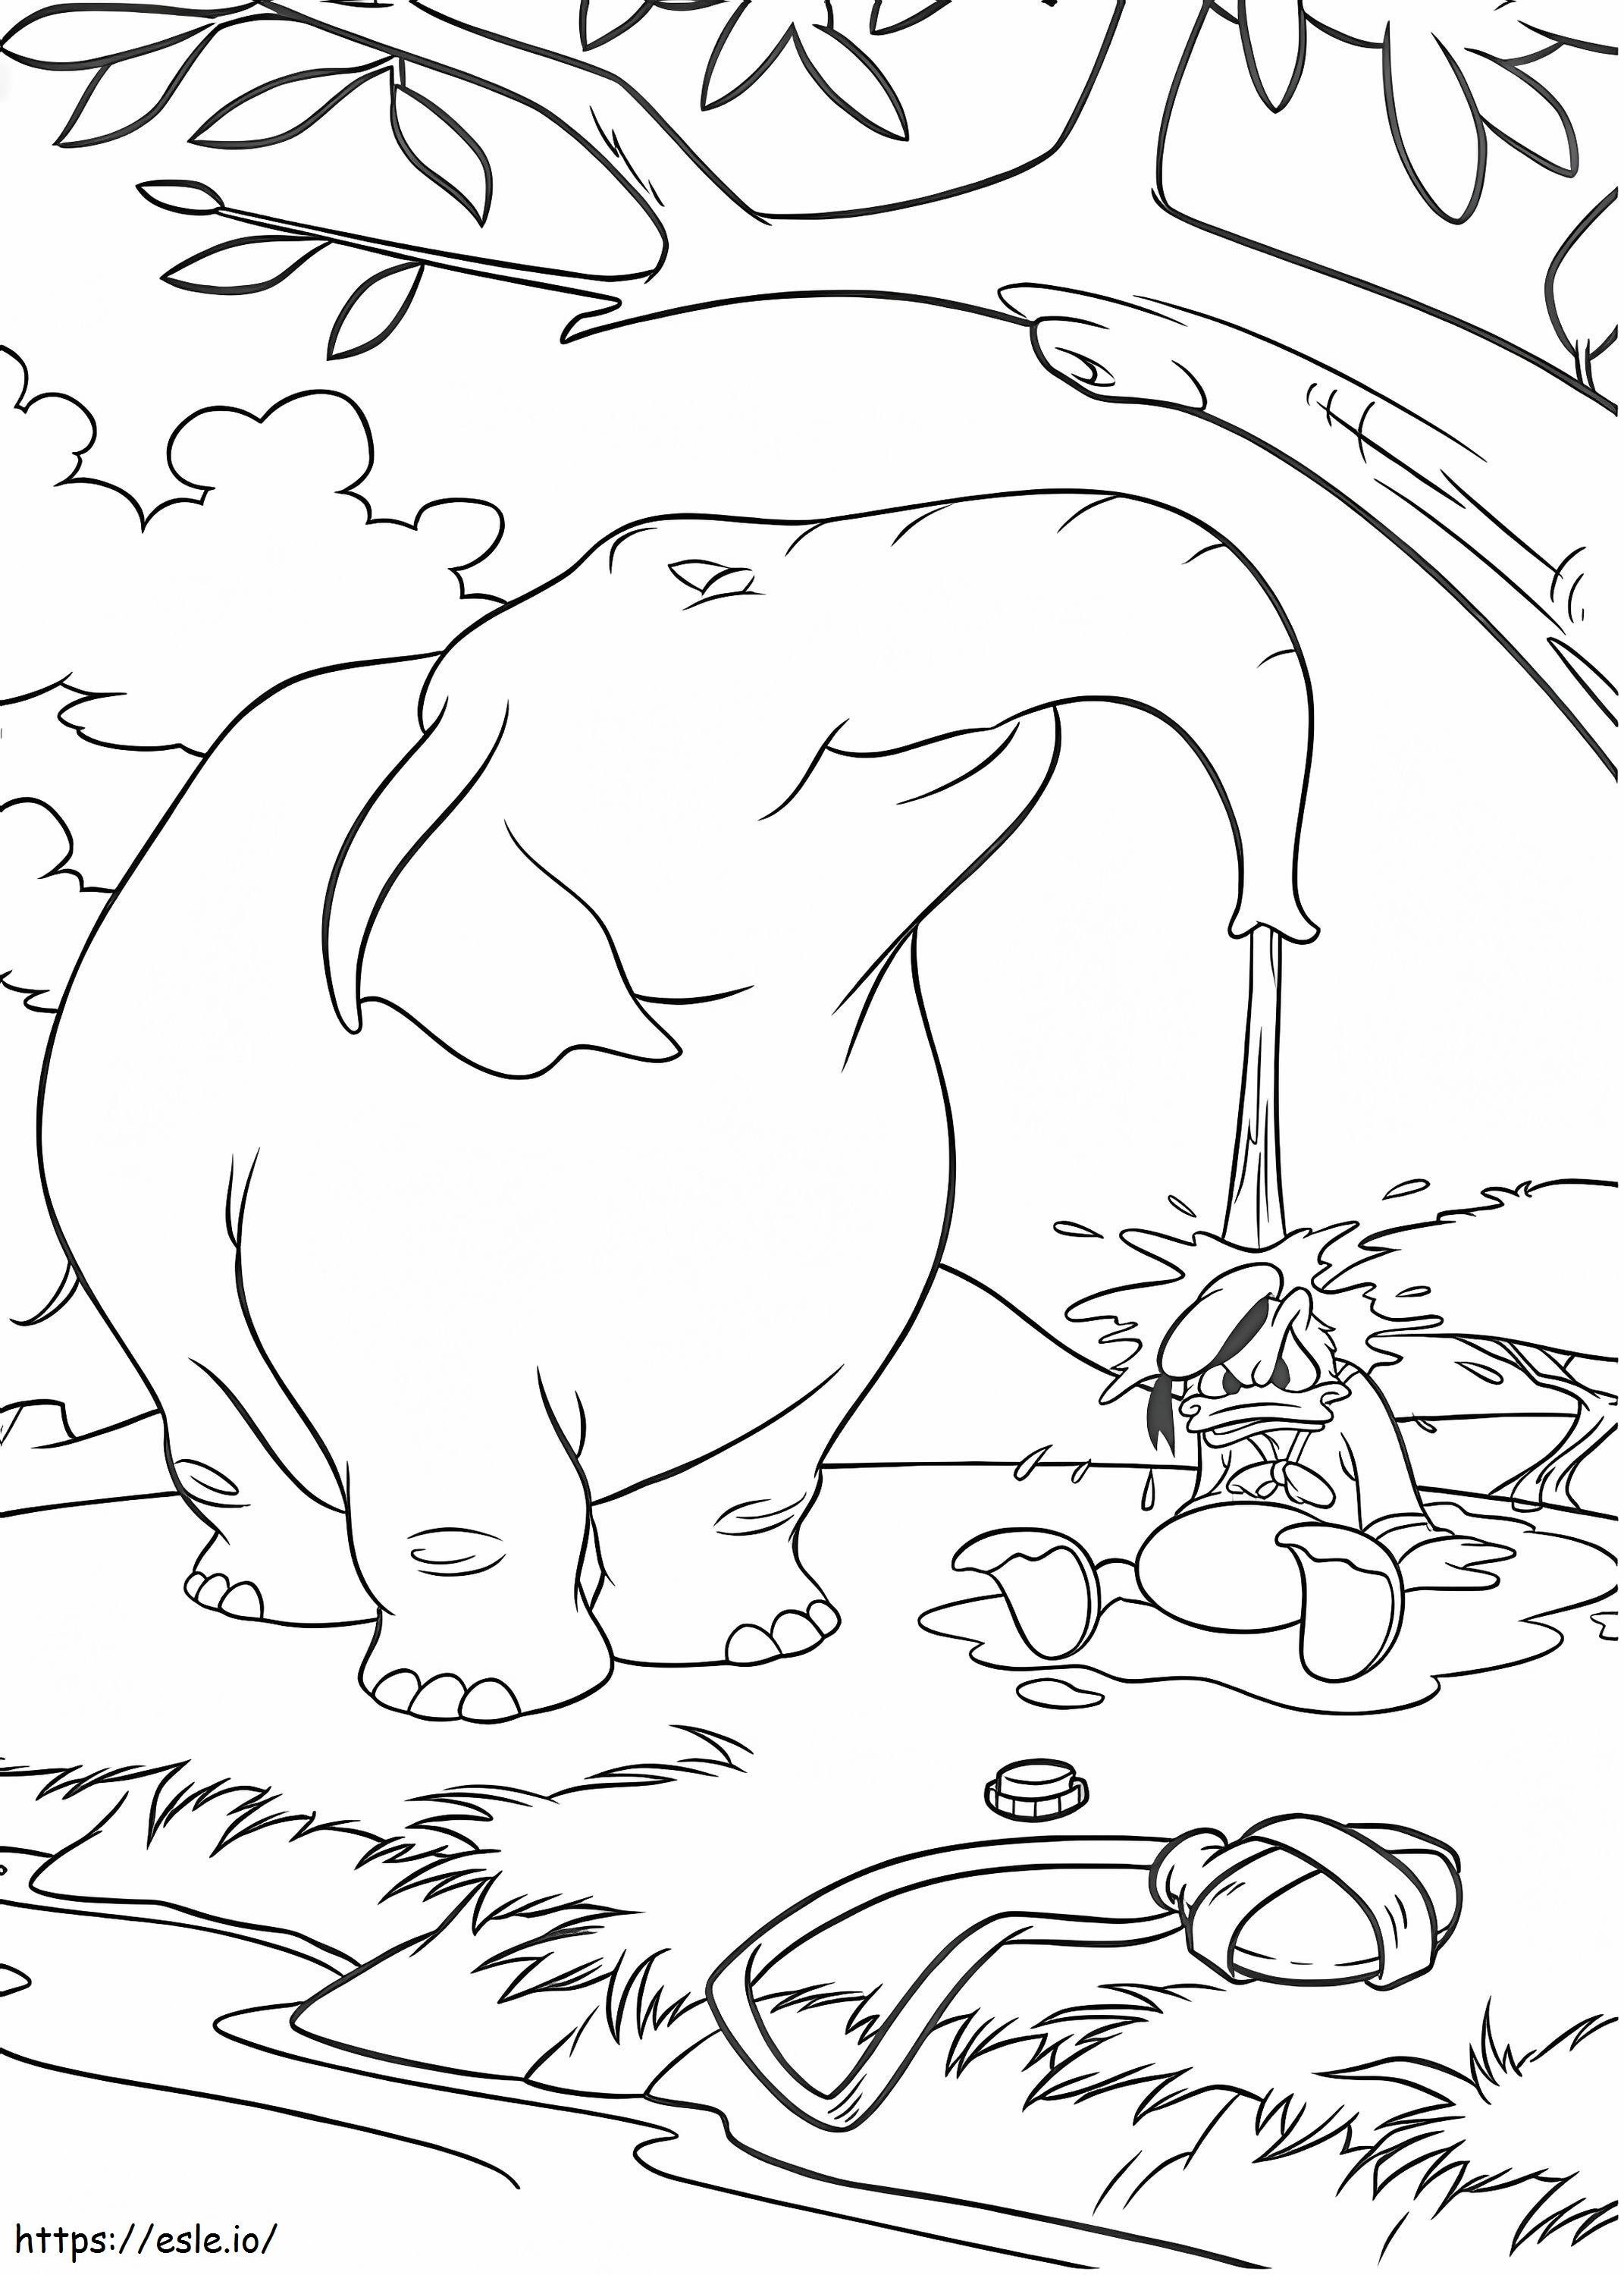 1534757782 Donald And Elephant A4 coloring page